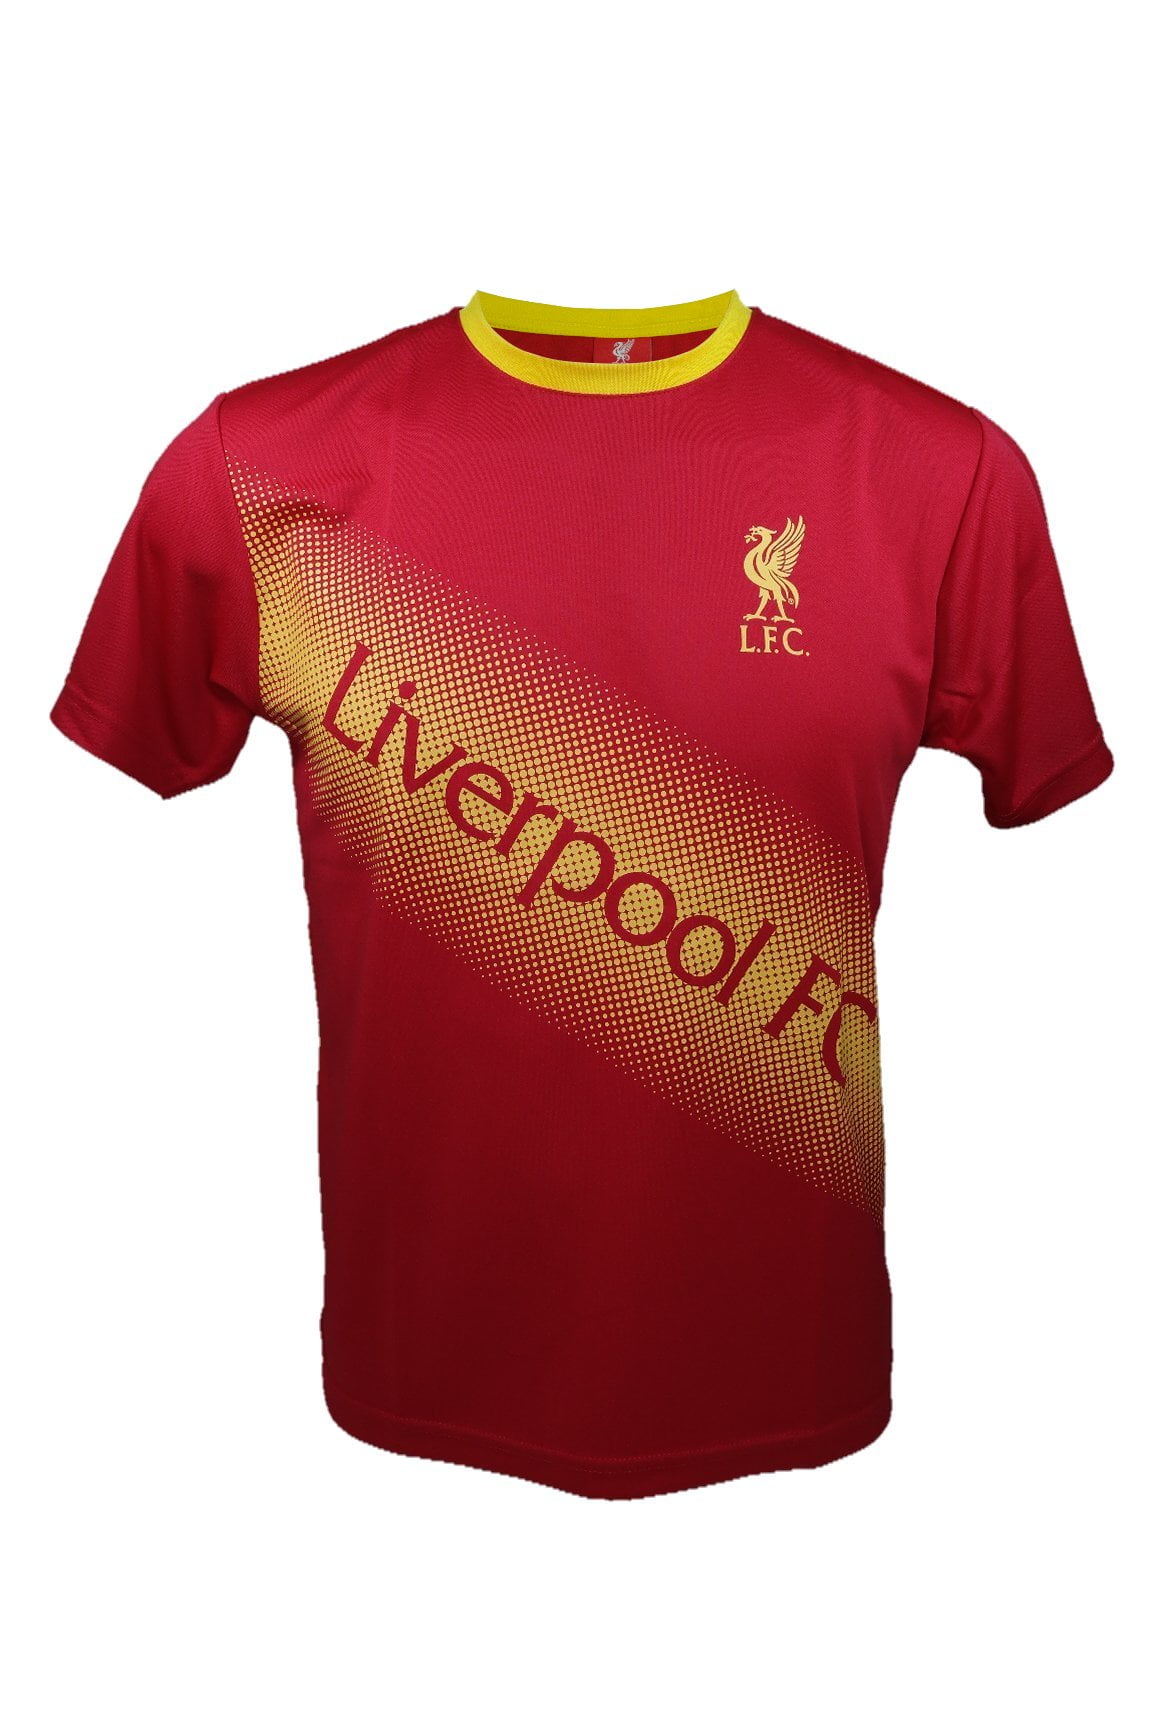 youth liverpool shirt